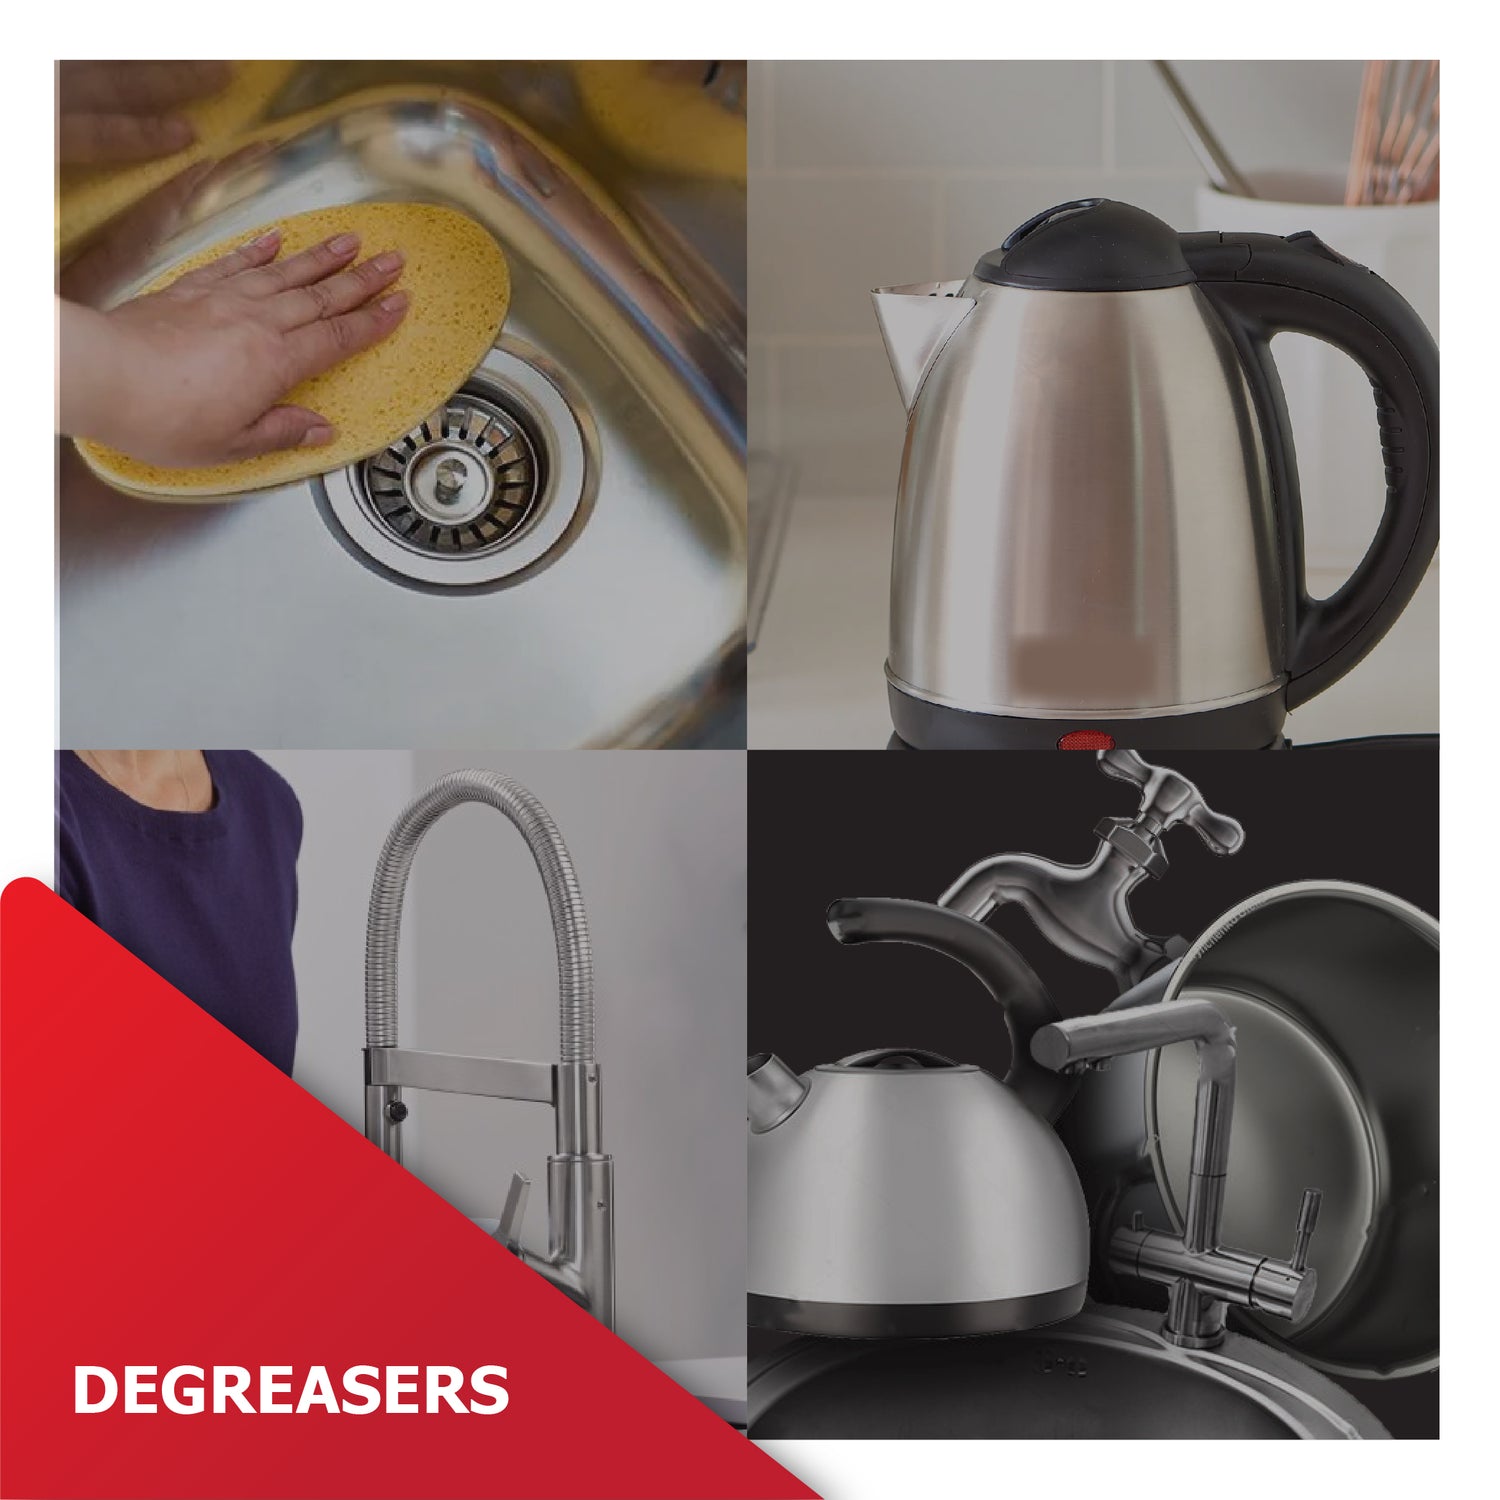 Degreasers | Category